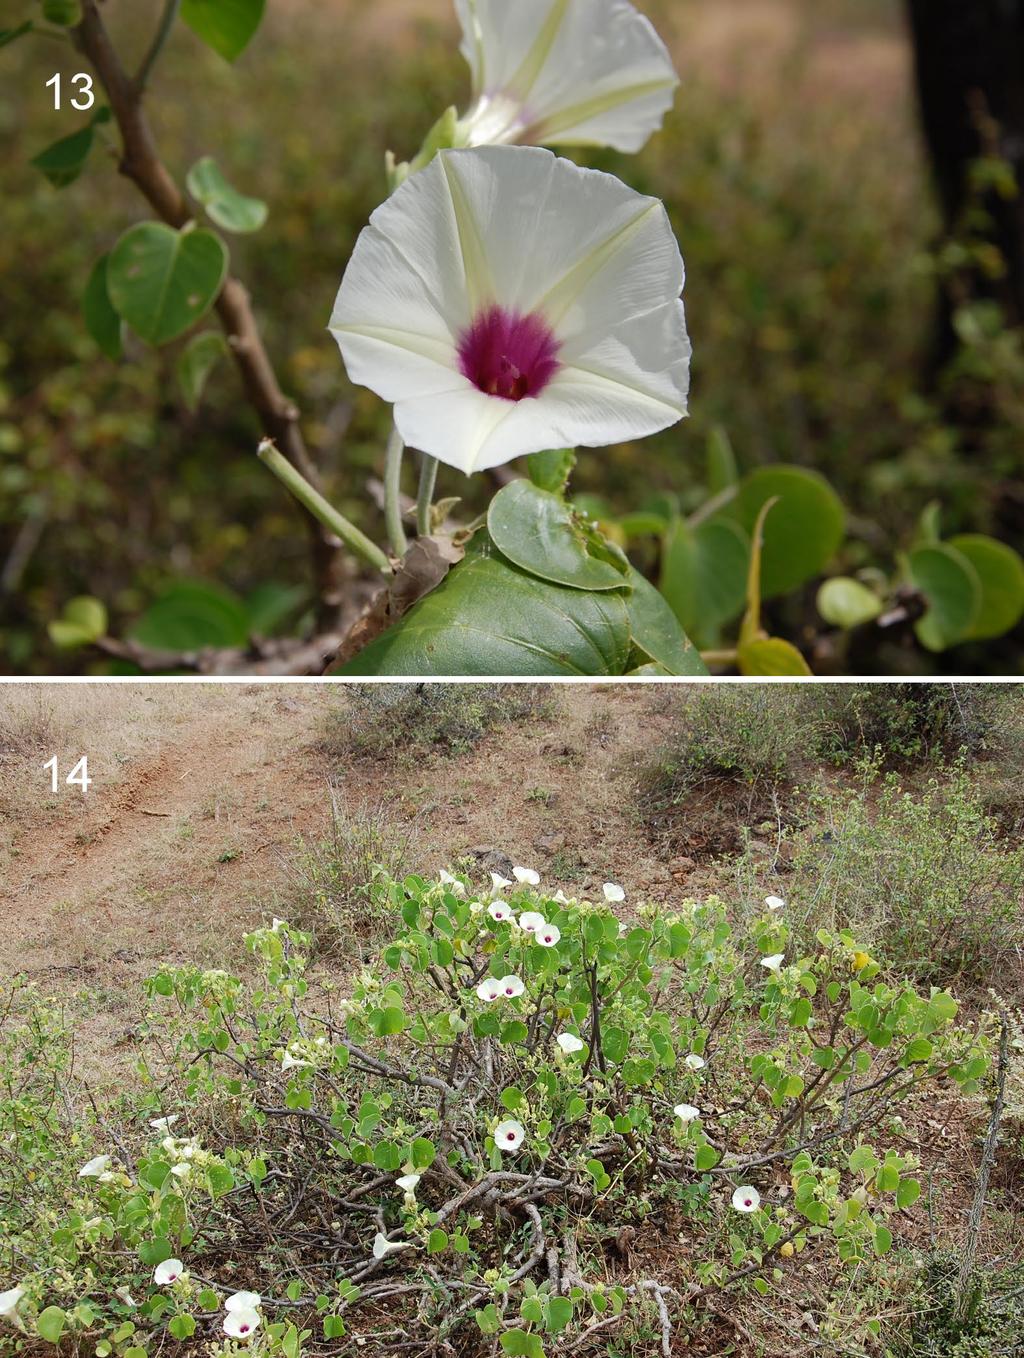 2017 Bossert & Patiny: Male of Systropha macronasuta 7 Figures 13 14. Photographs of the host plant, Ipomoea sp. (likely Ipomoea spathulata Hallier f.) in Kenya (photographs by B. Danforth). 13. Inflorescence detail.